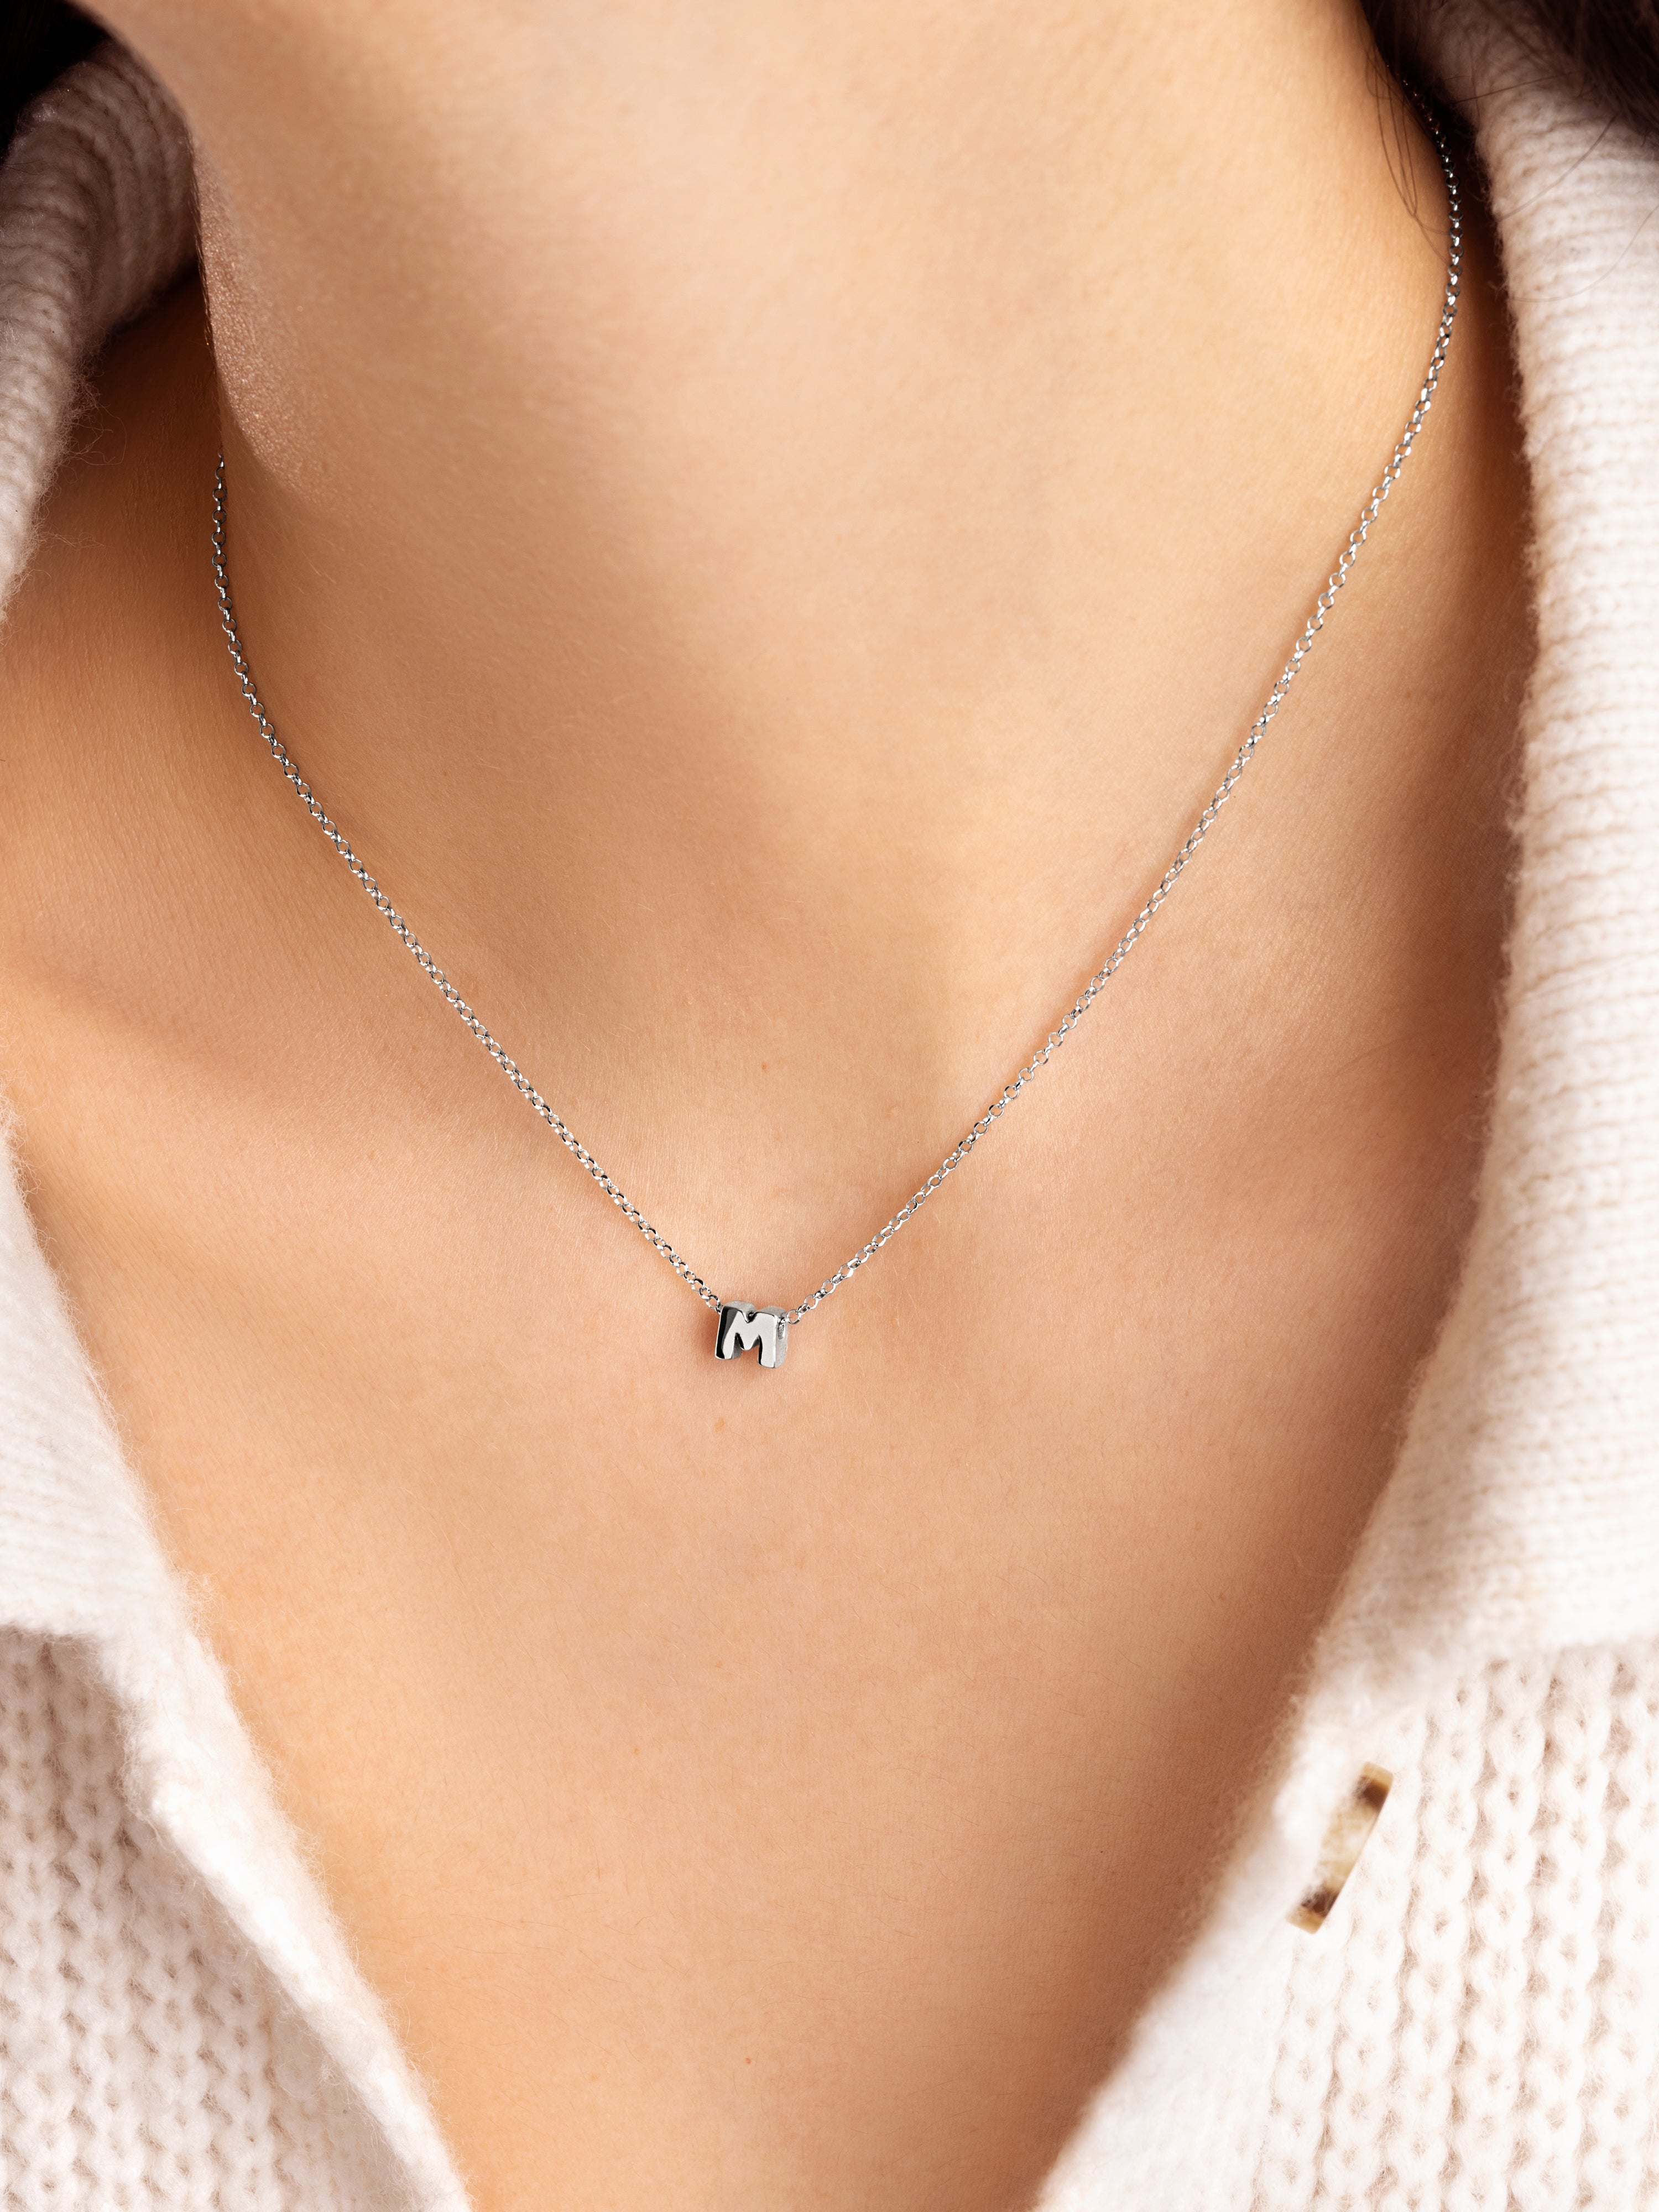 Single Letter Personalized Silver Necklace